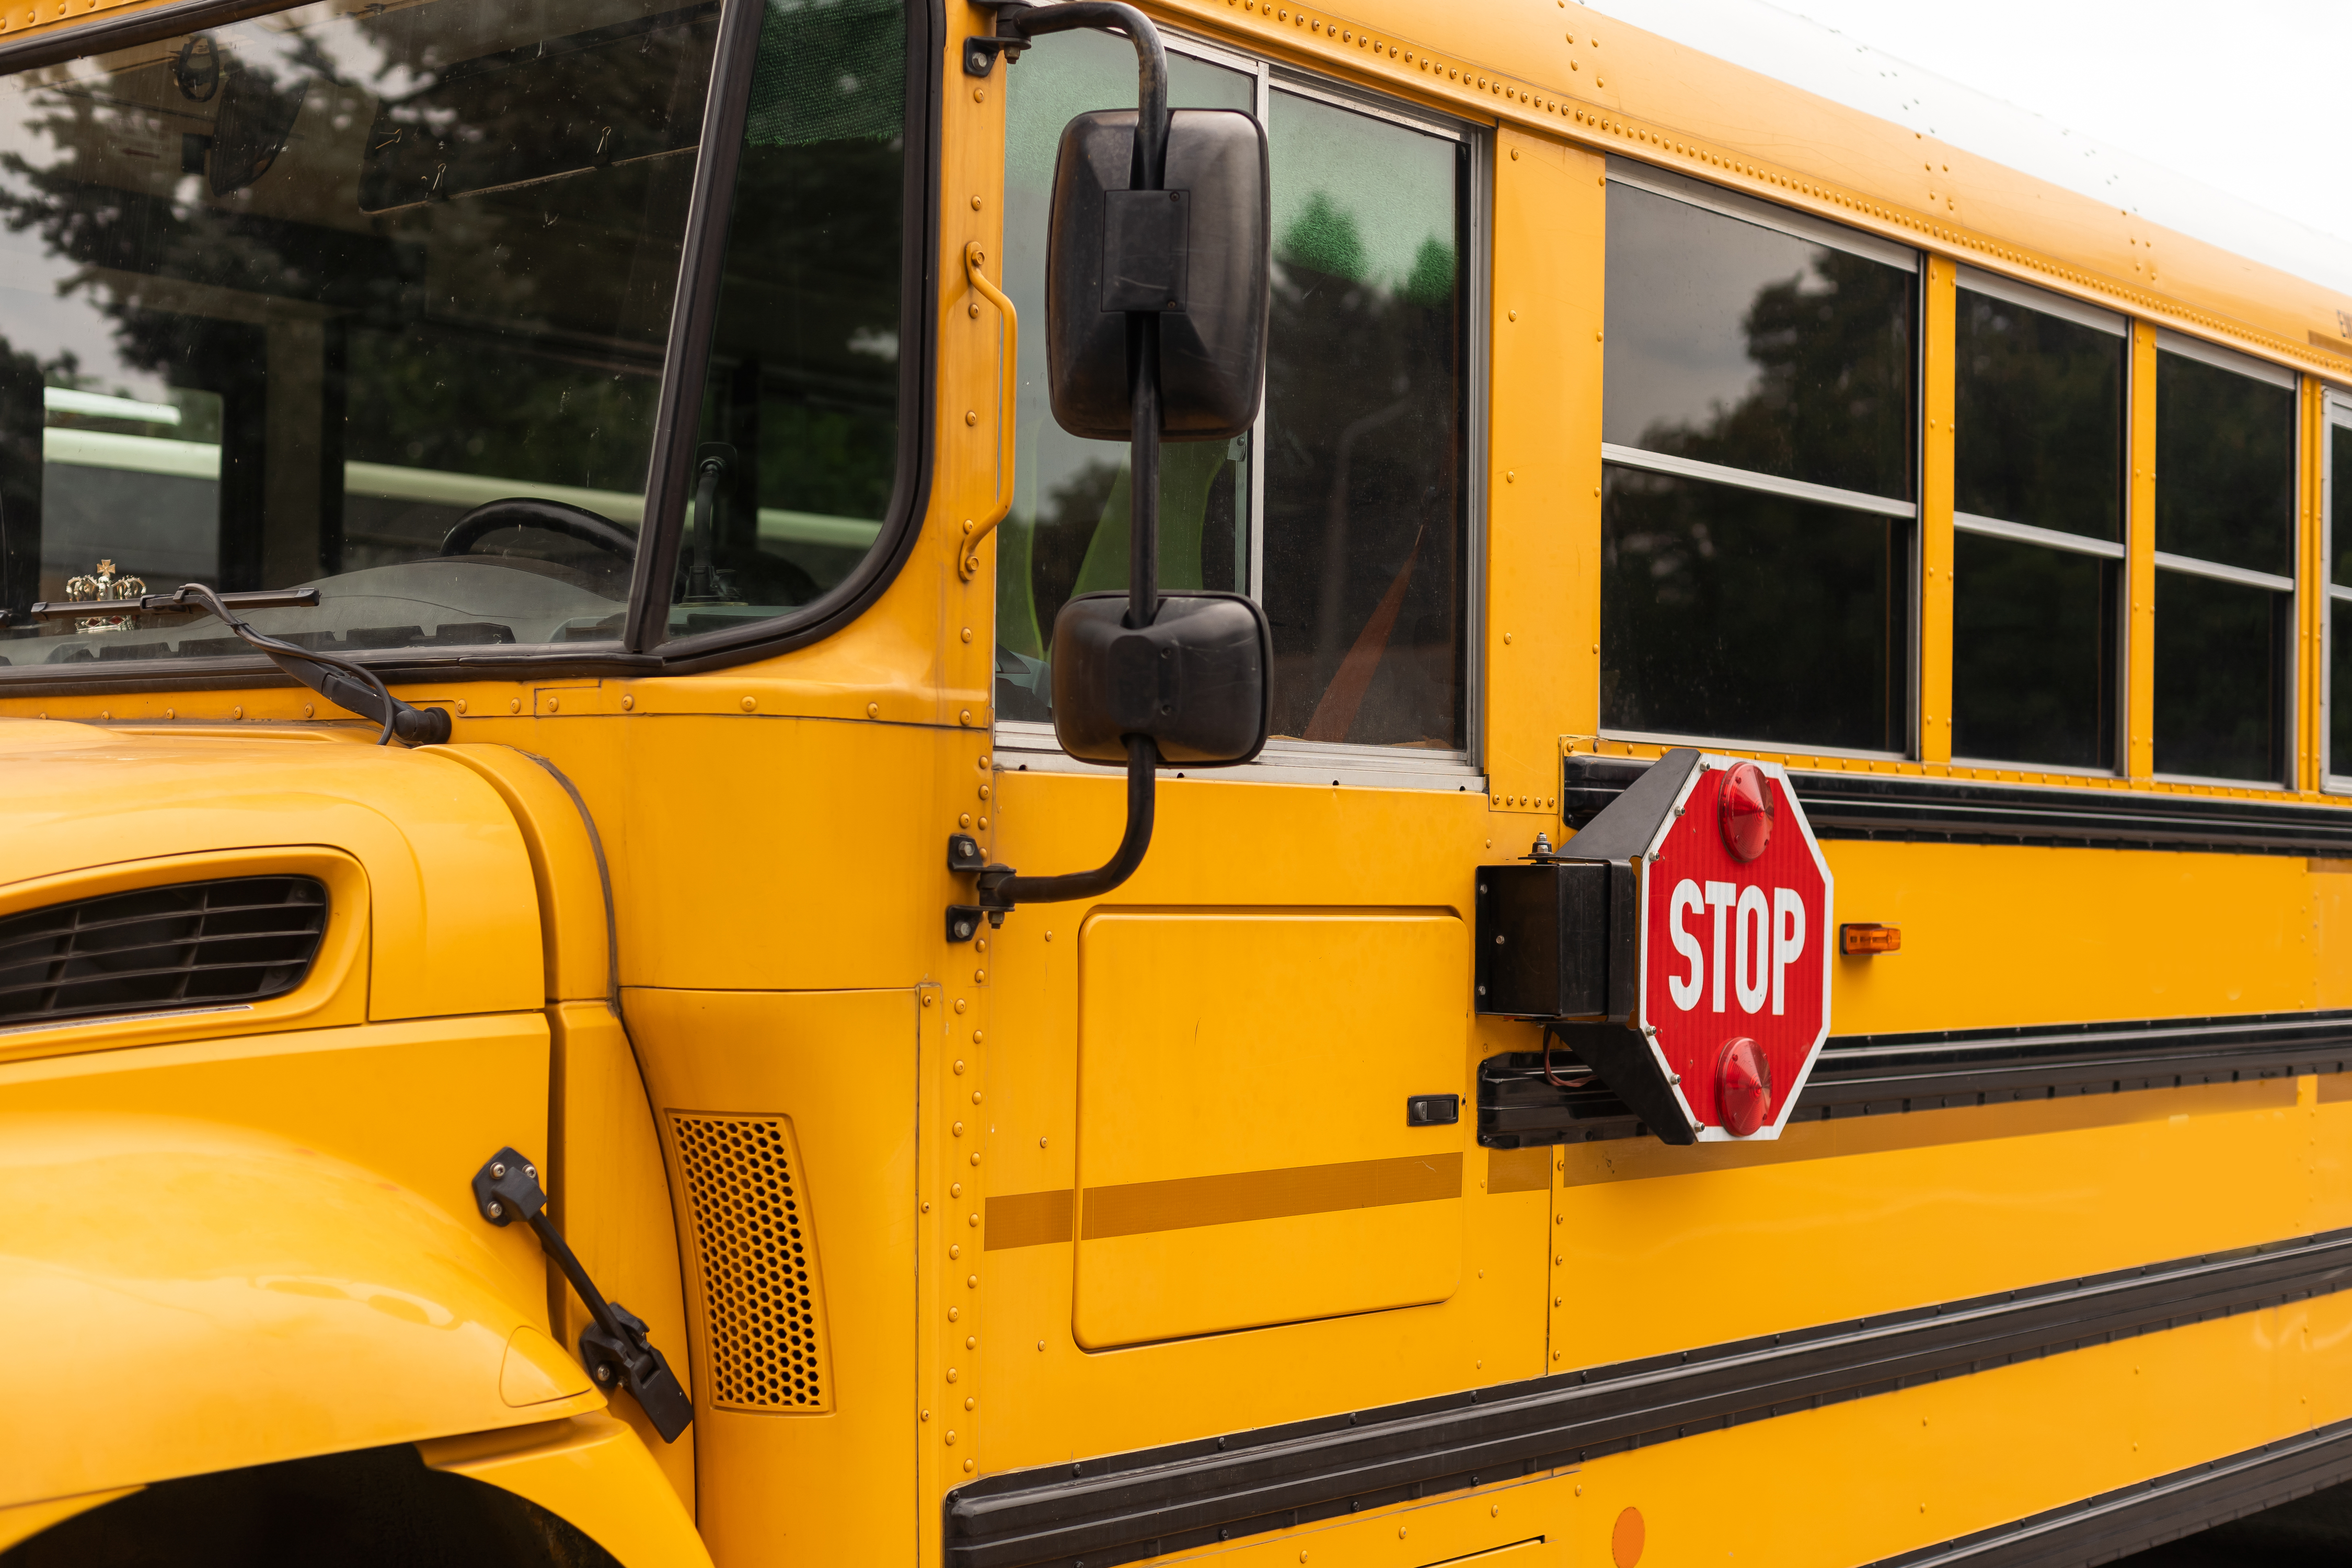 Pa. Education Committee looking for bus driver shortage solutions as headaches ensue for parents, instructors